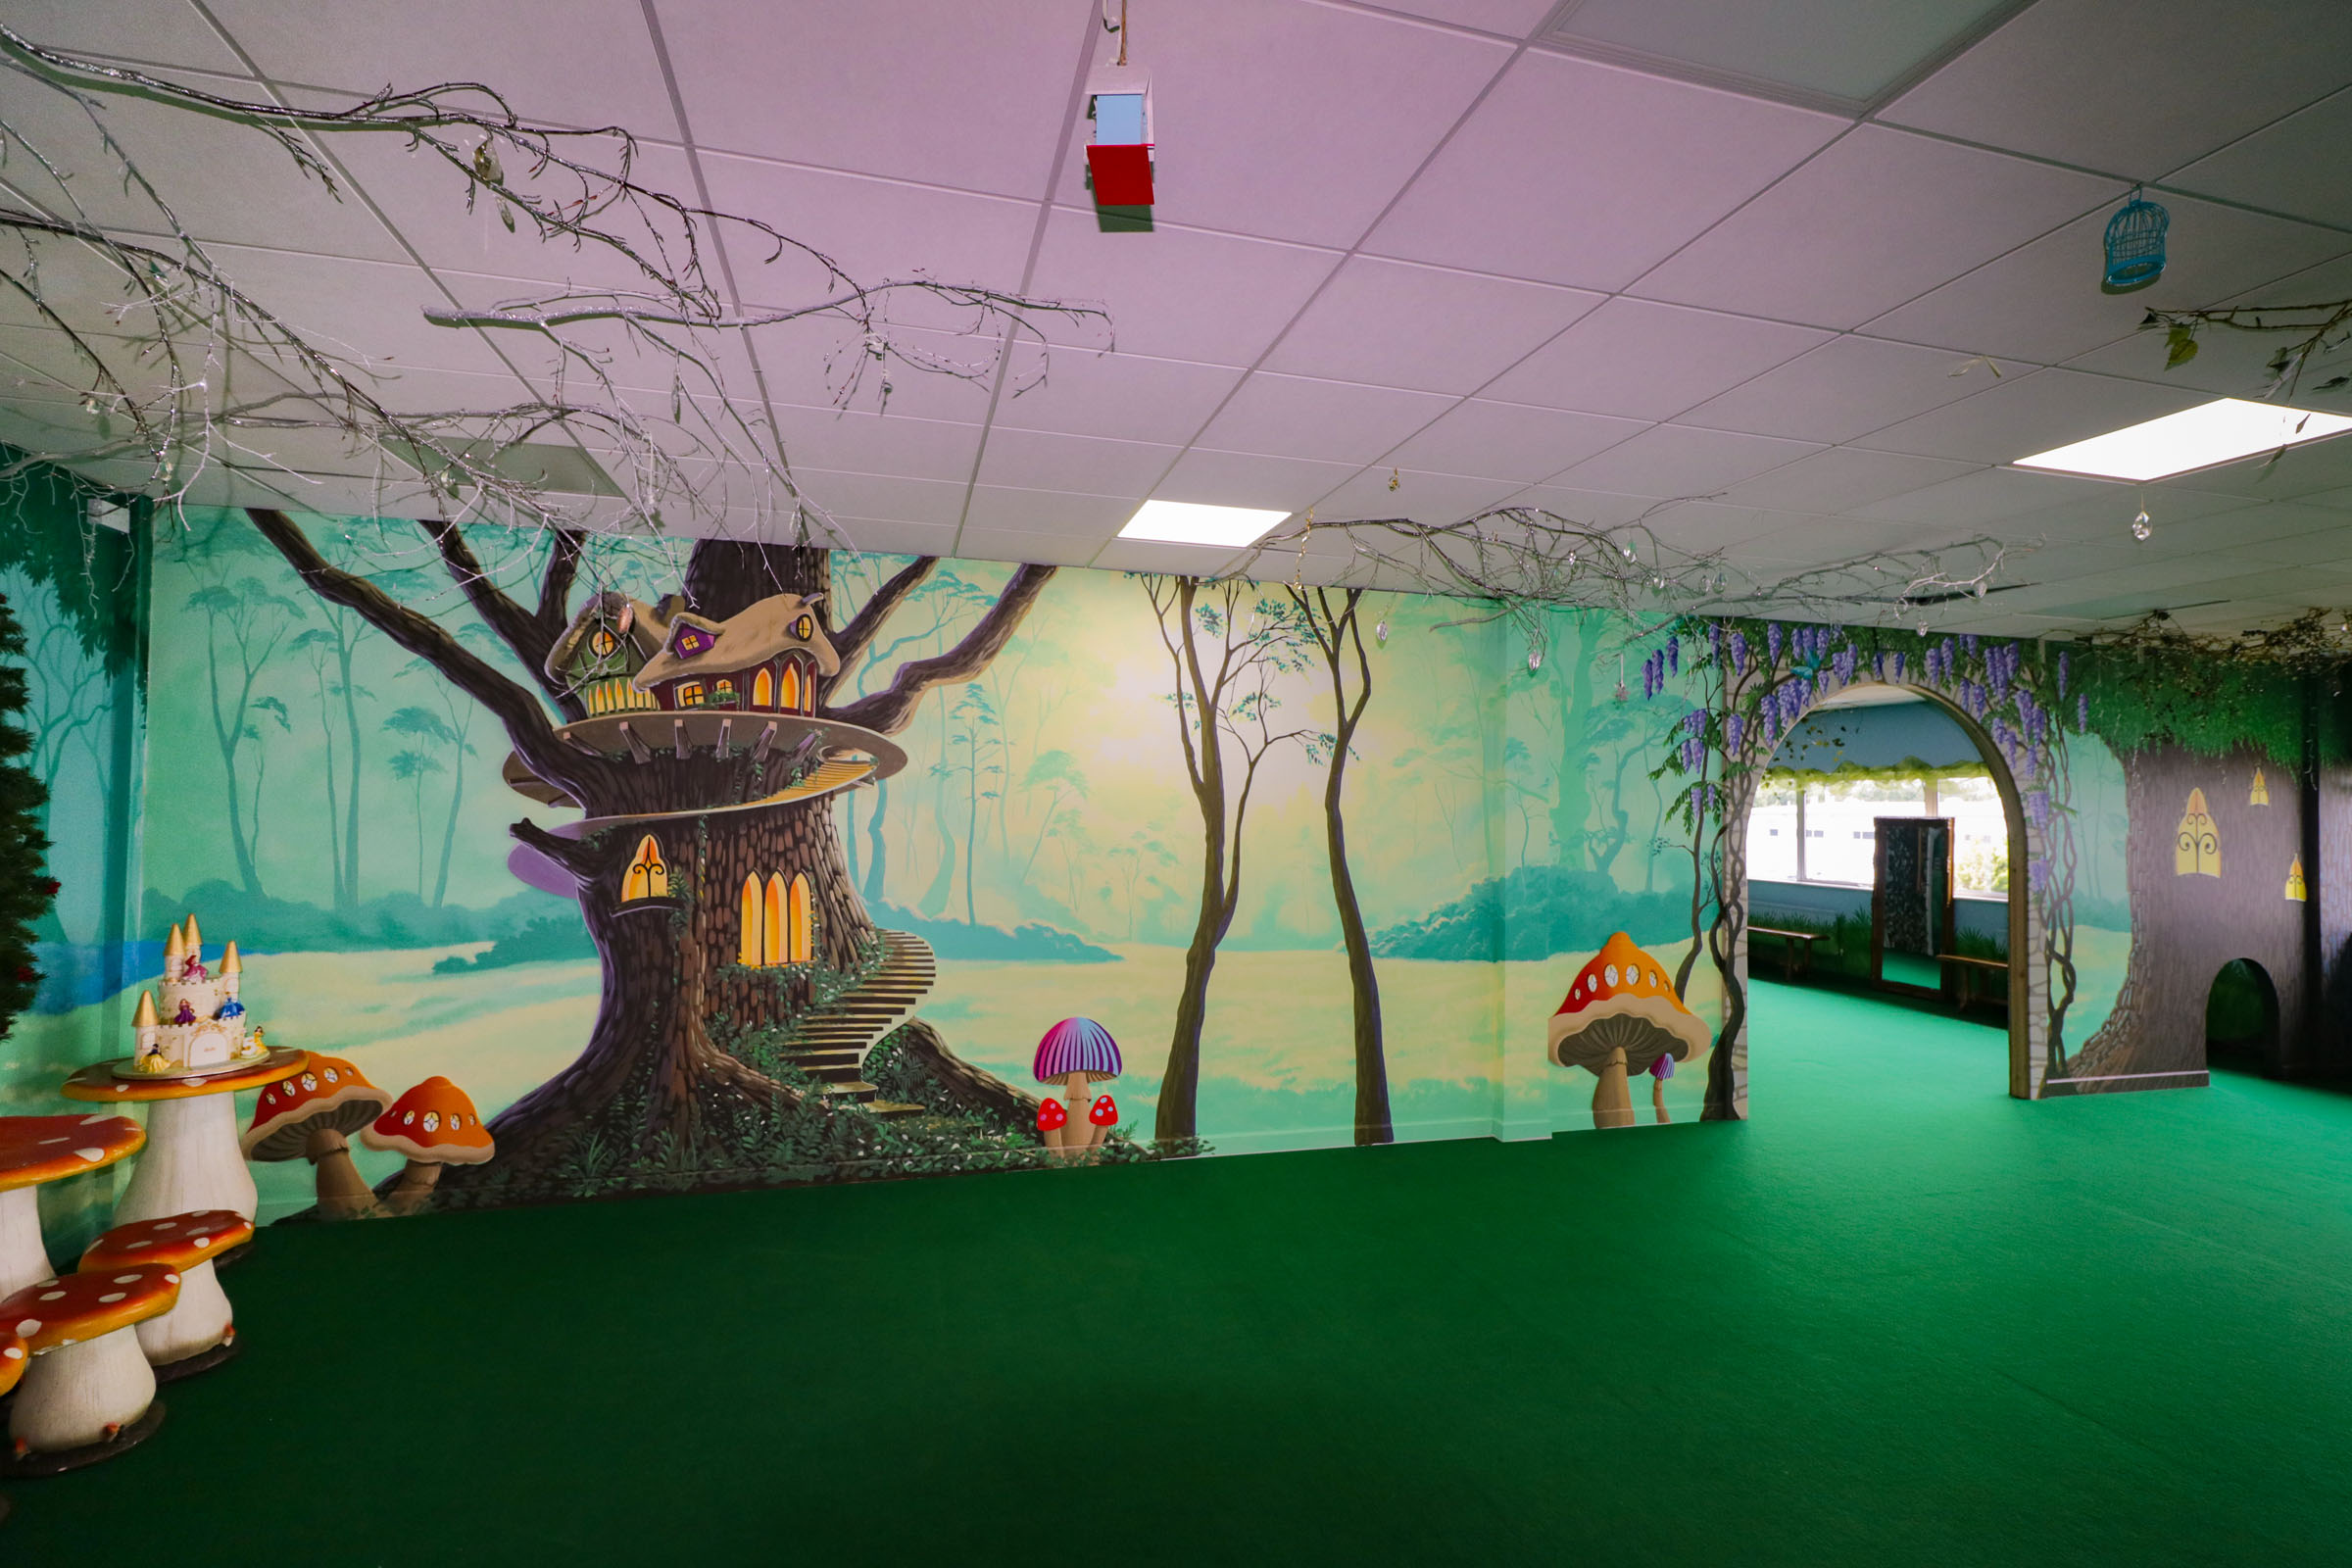 Magic Forest Party Room at the Riverside Hub, Northampton, Main wall showing the large size of the room and mural